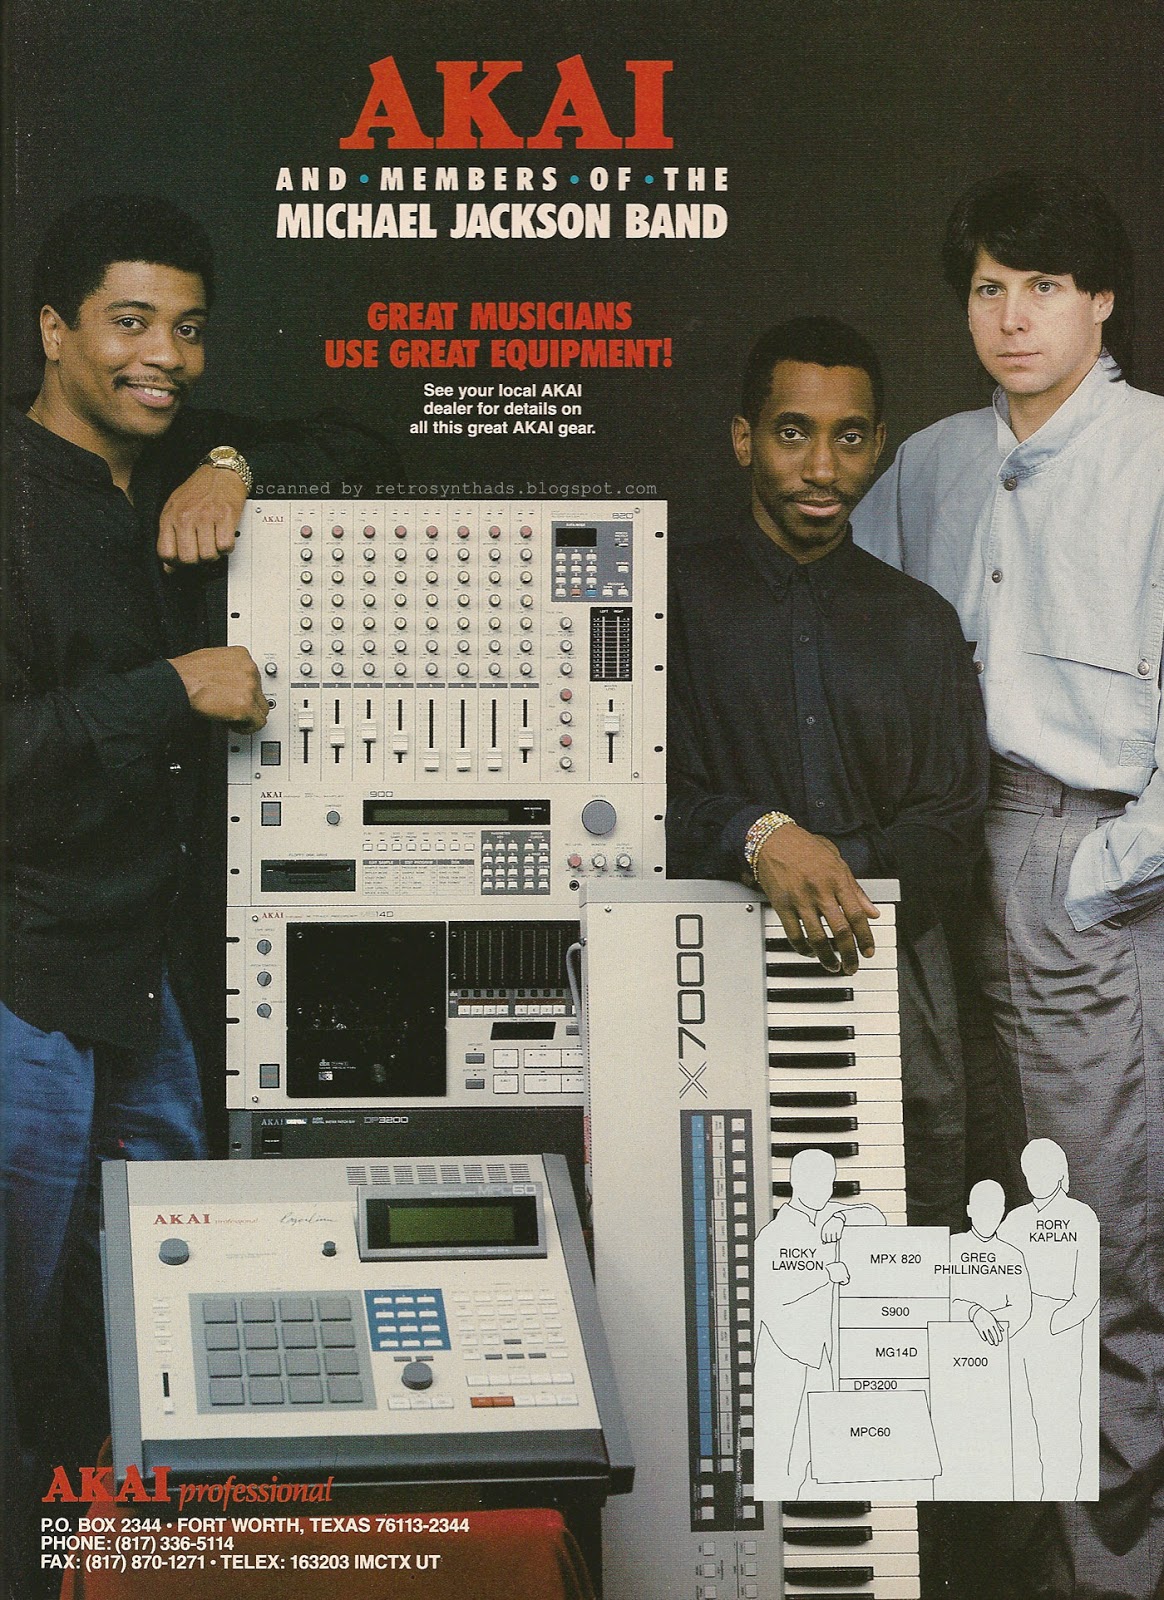 Retro Synth Ads: Akai "Michael Jackson Band - Great musicians use great